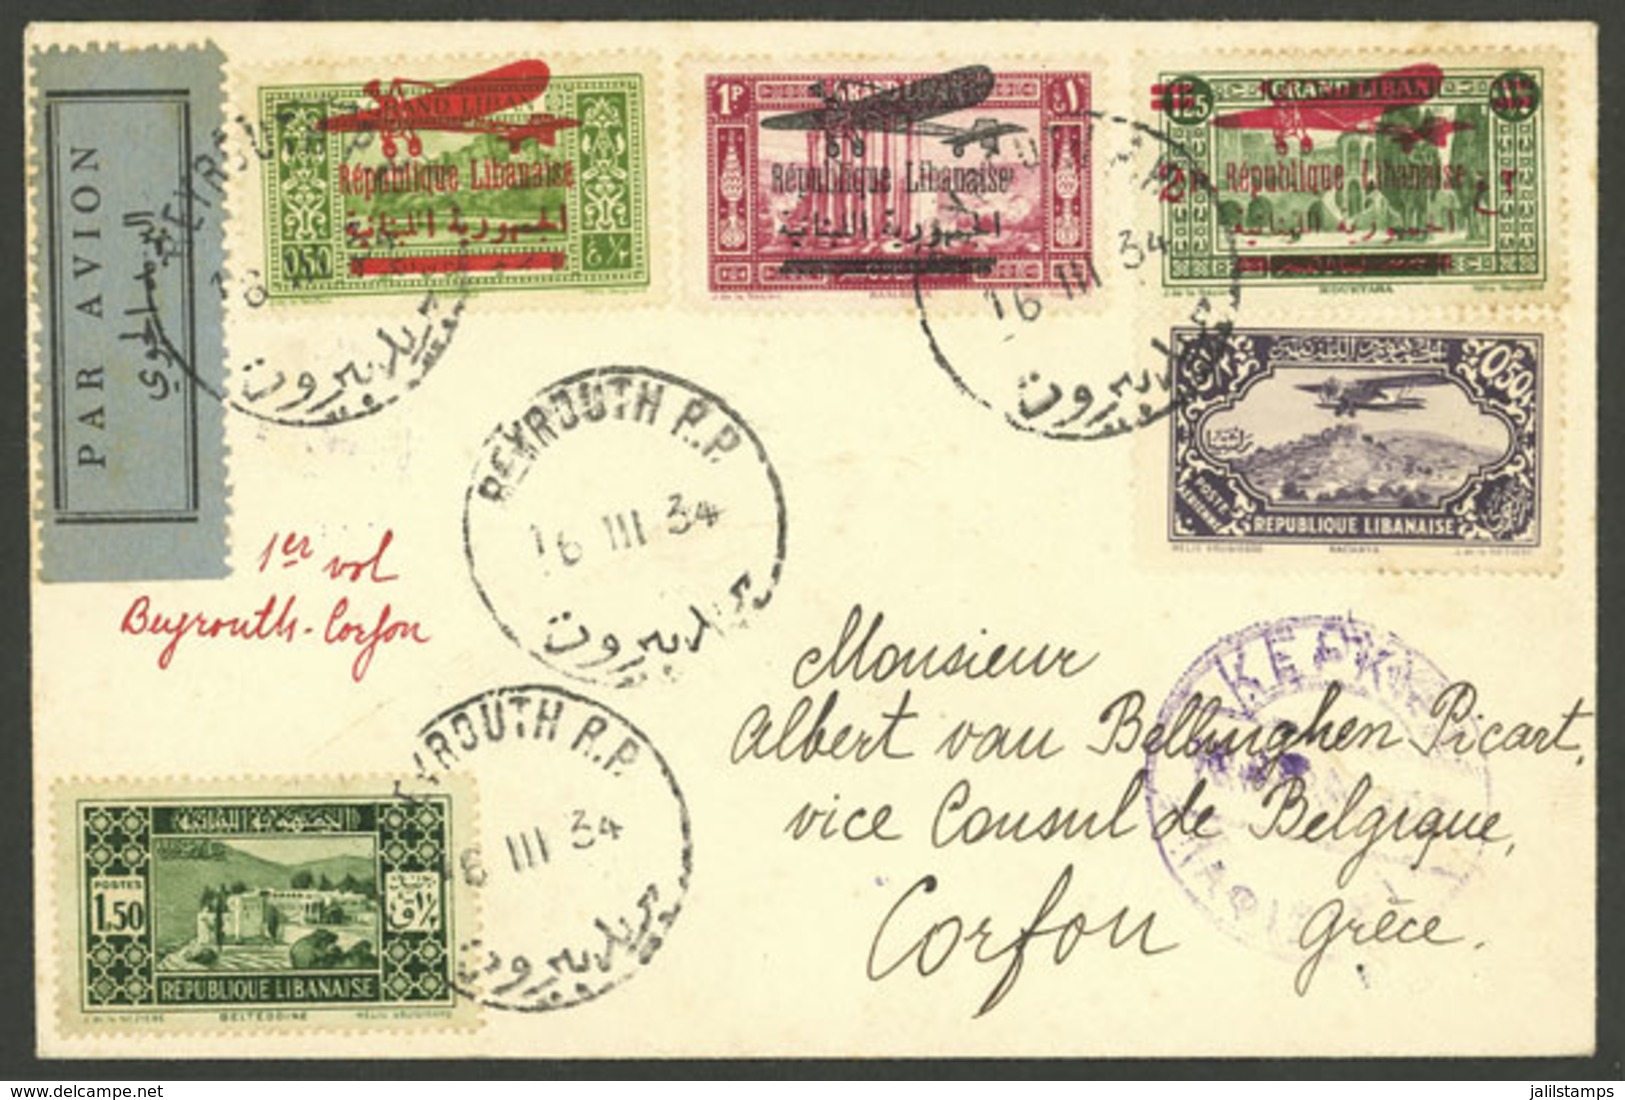 LEBANON: 16/MAR/1934 Beyrouth - Corfu (Greece), First Flight, Cover With Very Nice Postage And Arrival Marks On Front An - Líbano